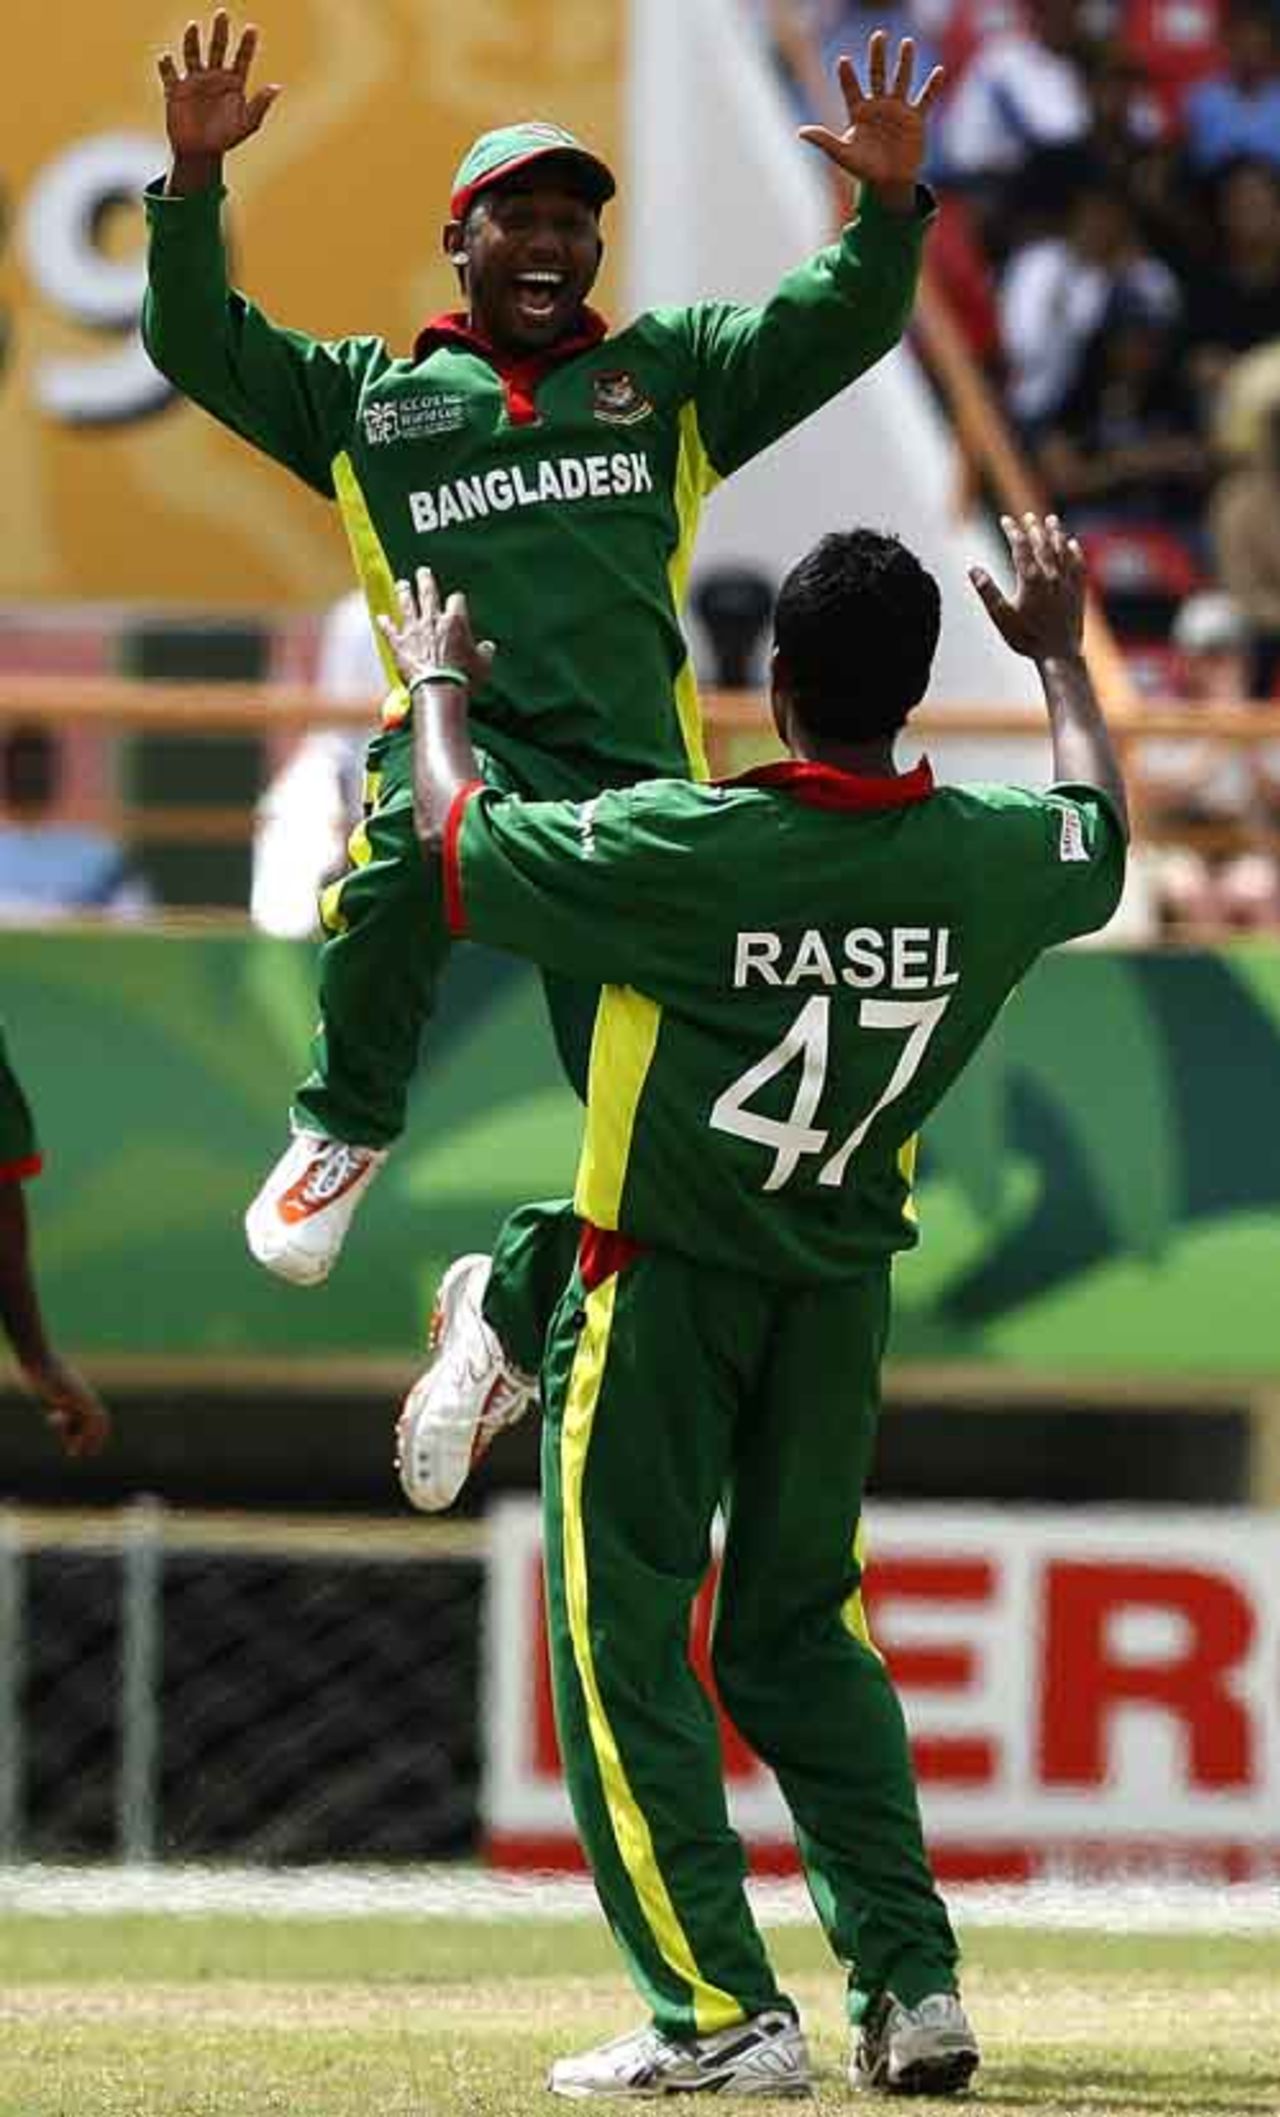 Sayed Rasel and Aftab Ahmed celebrate the big wicket of Jacques Kallis, Bangladesh vs South Africa, Super Eights, Guyana, April 7, 2007